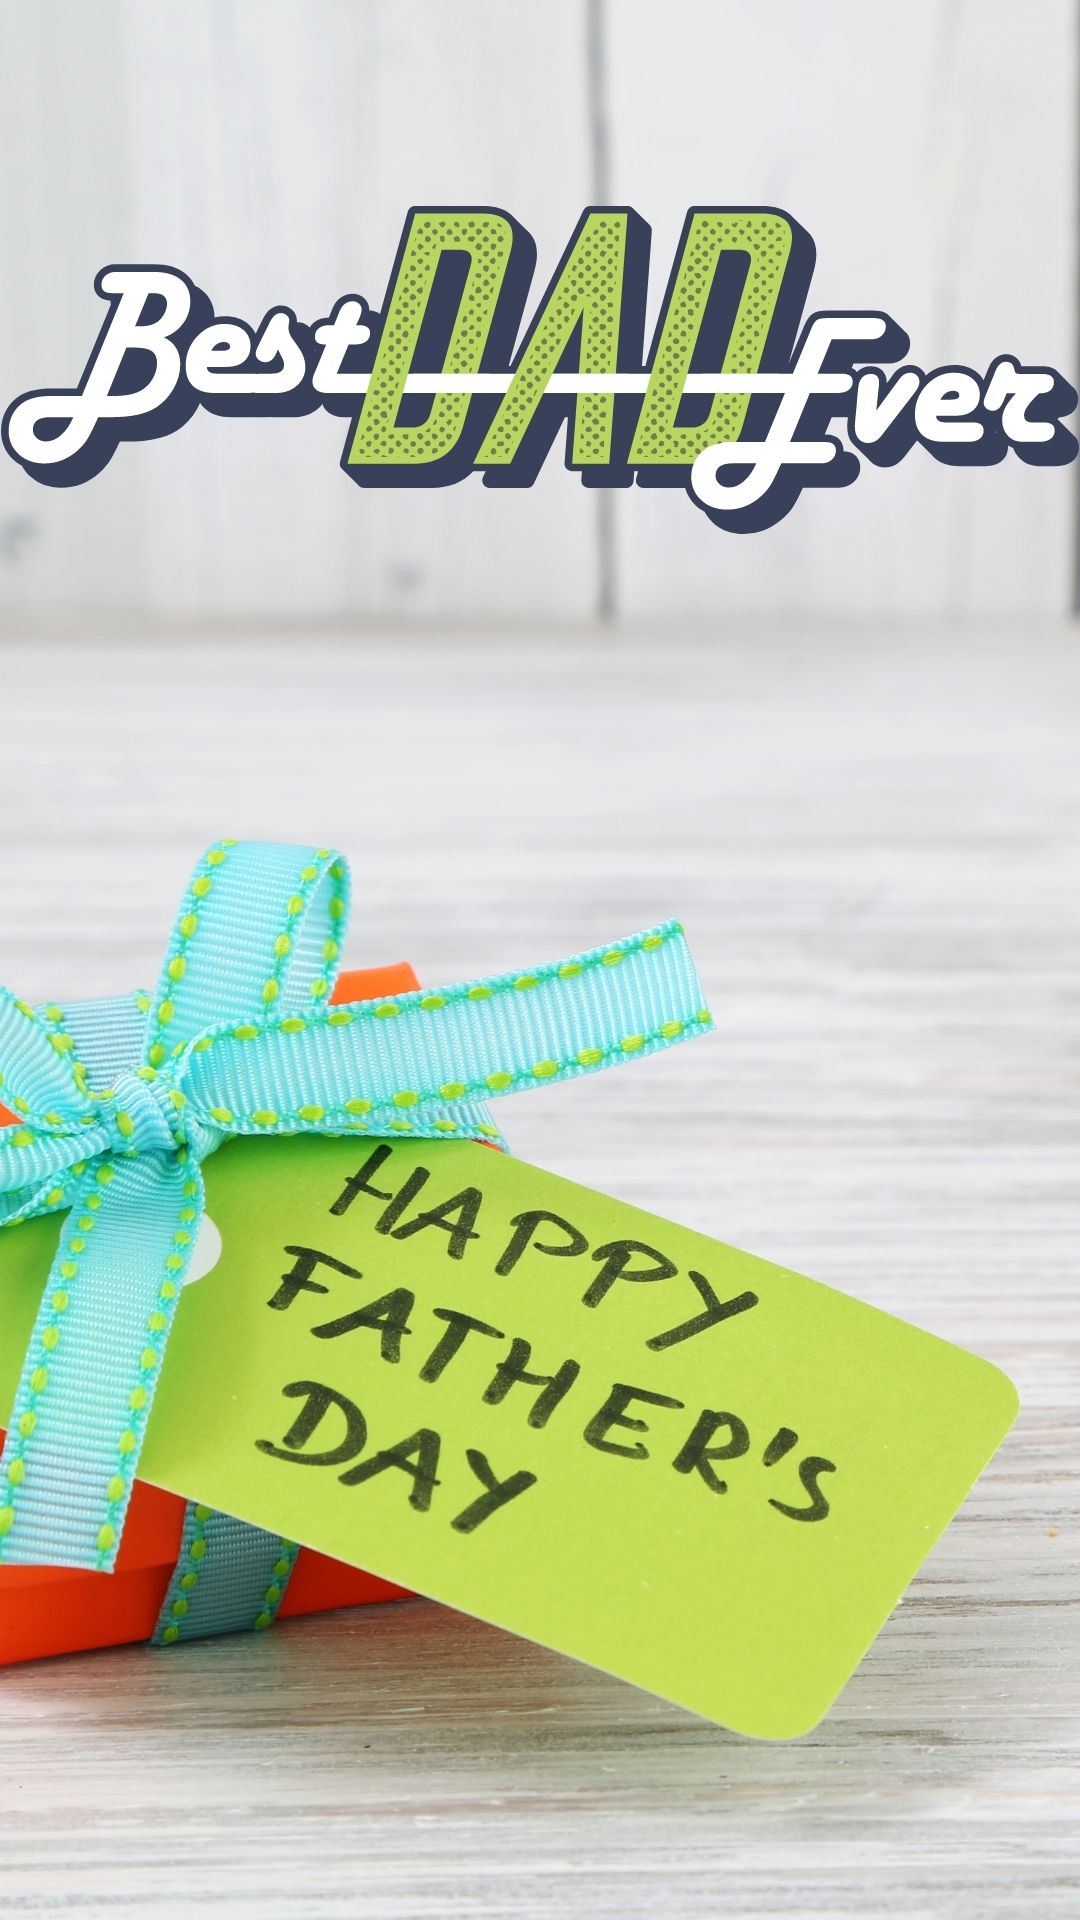 best happy father's day wishes images for instagram story (4)